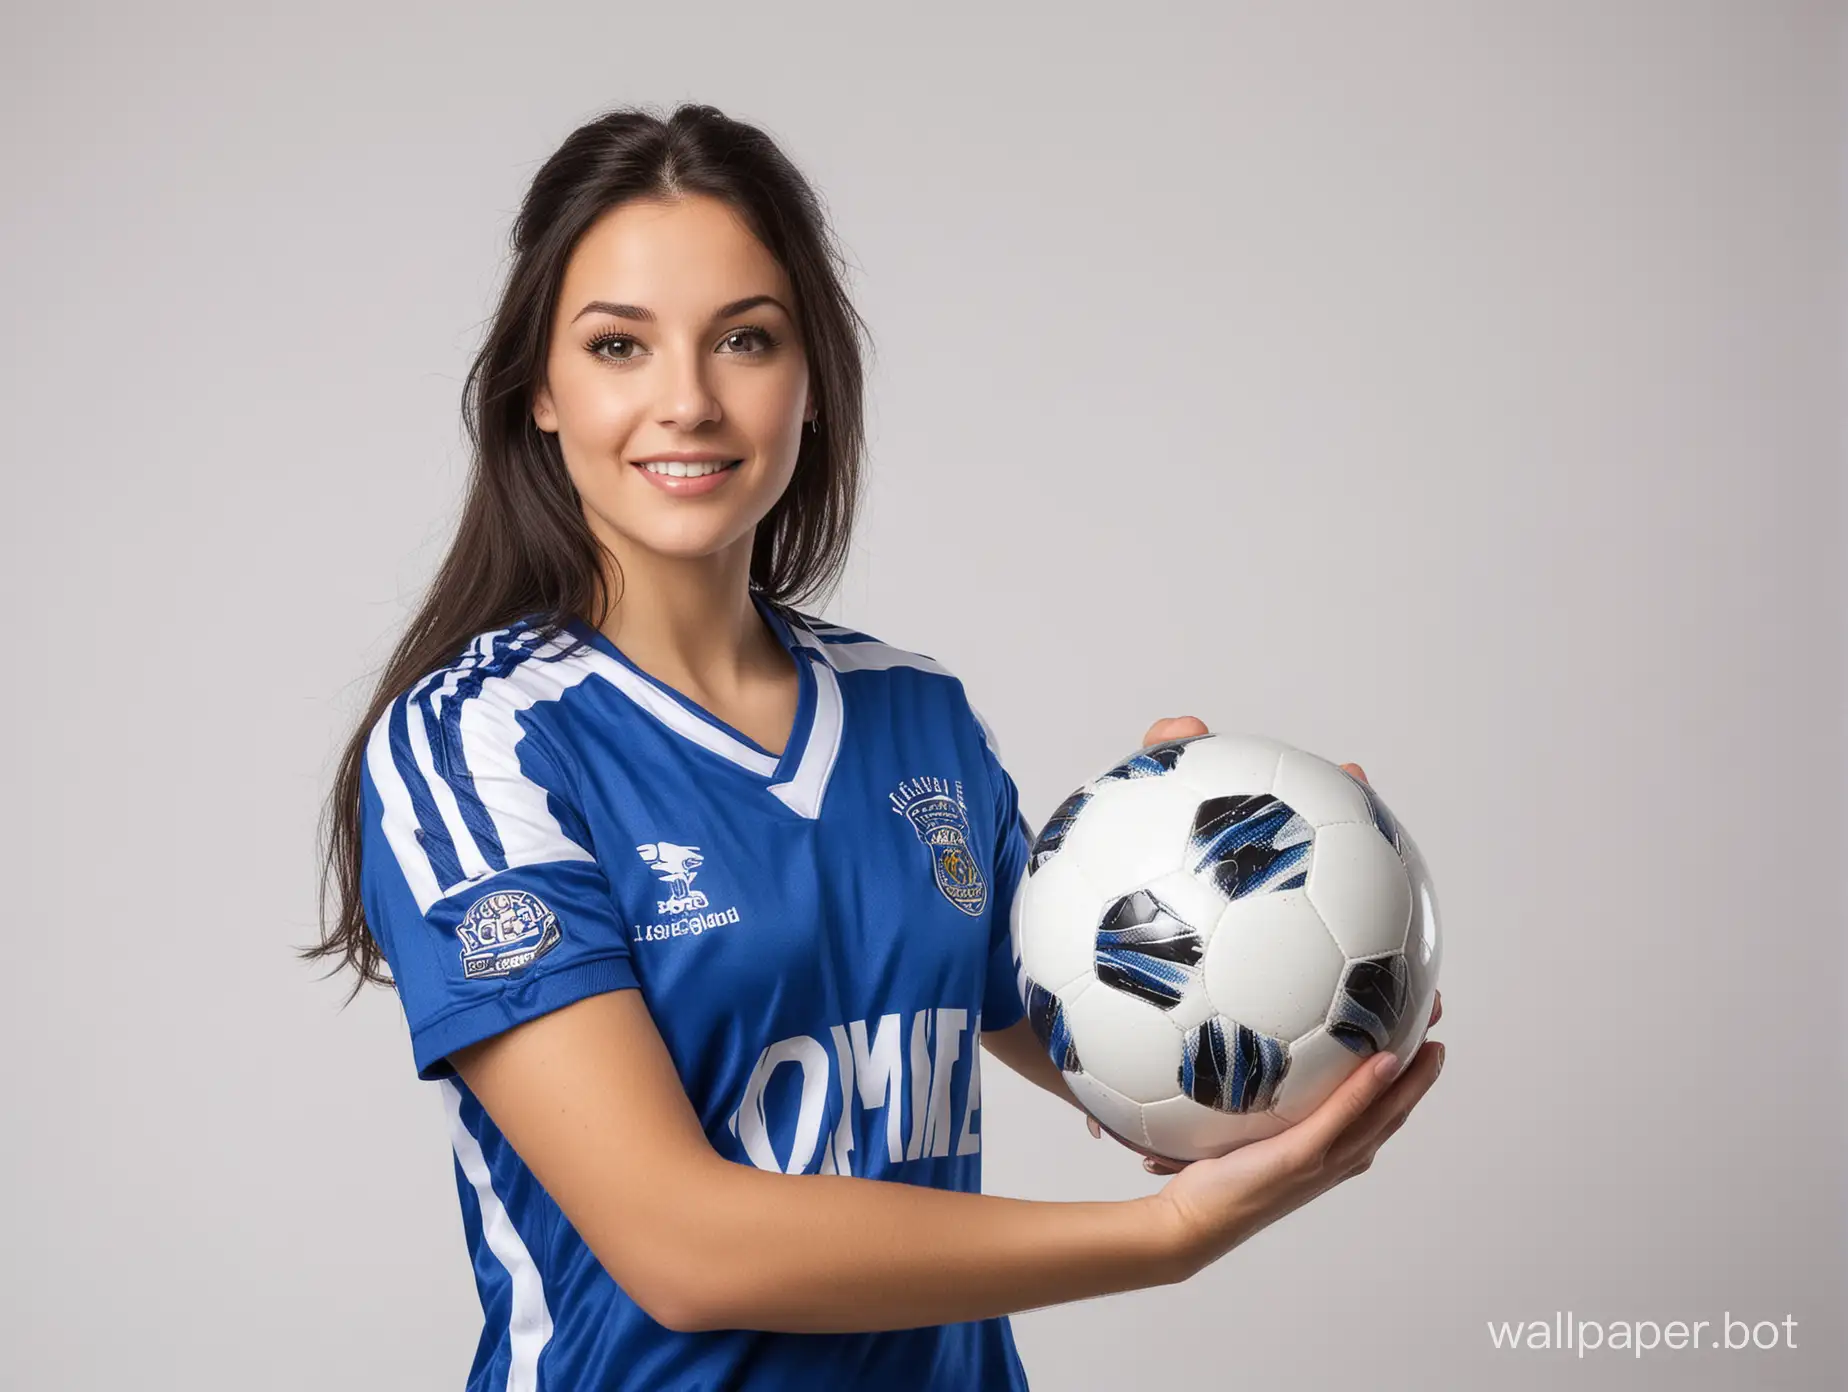 Lisa Duarte   20 years old, dark hair hairstyle   , cup size 4, narrow waist, in bright blue soccer uniform on a white background studio portrait masterpiece